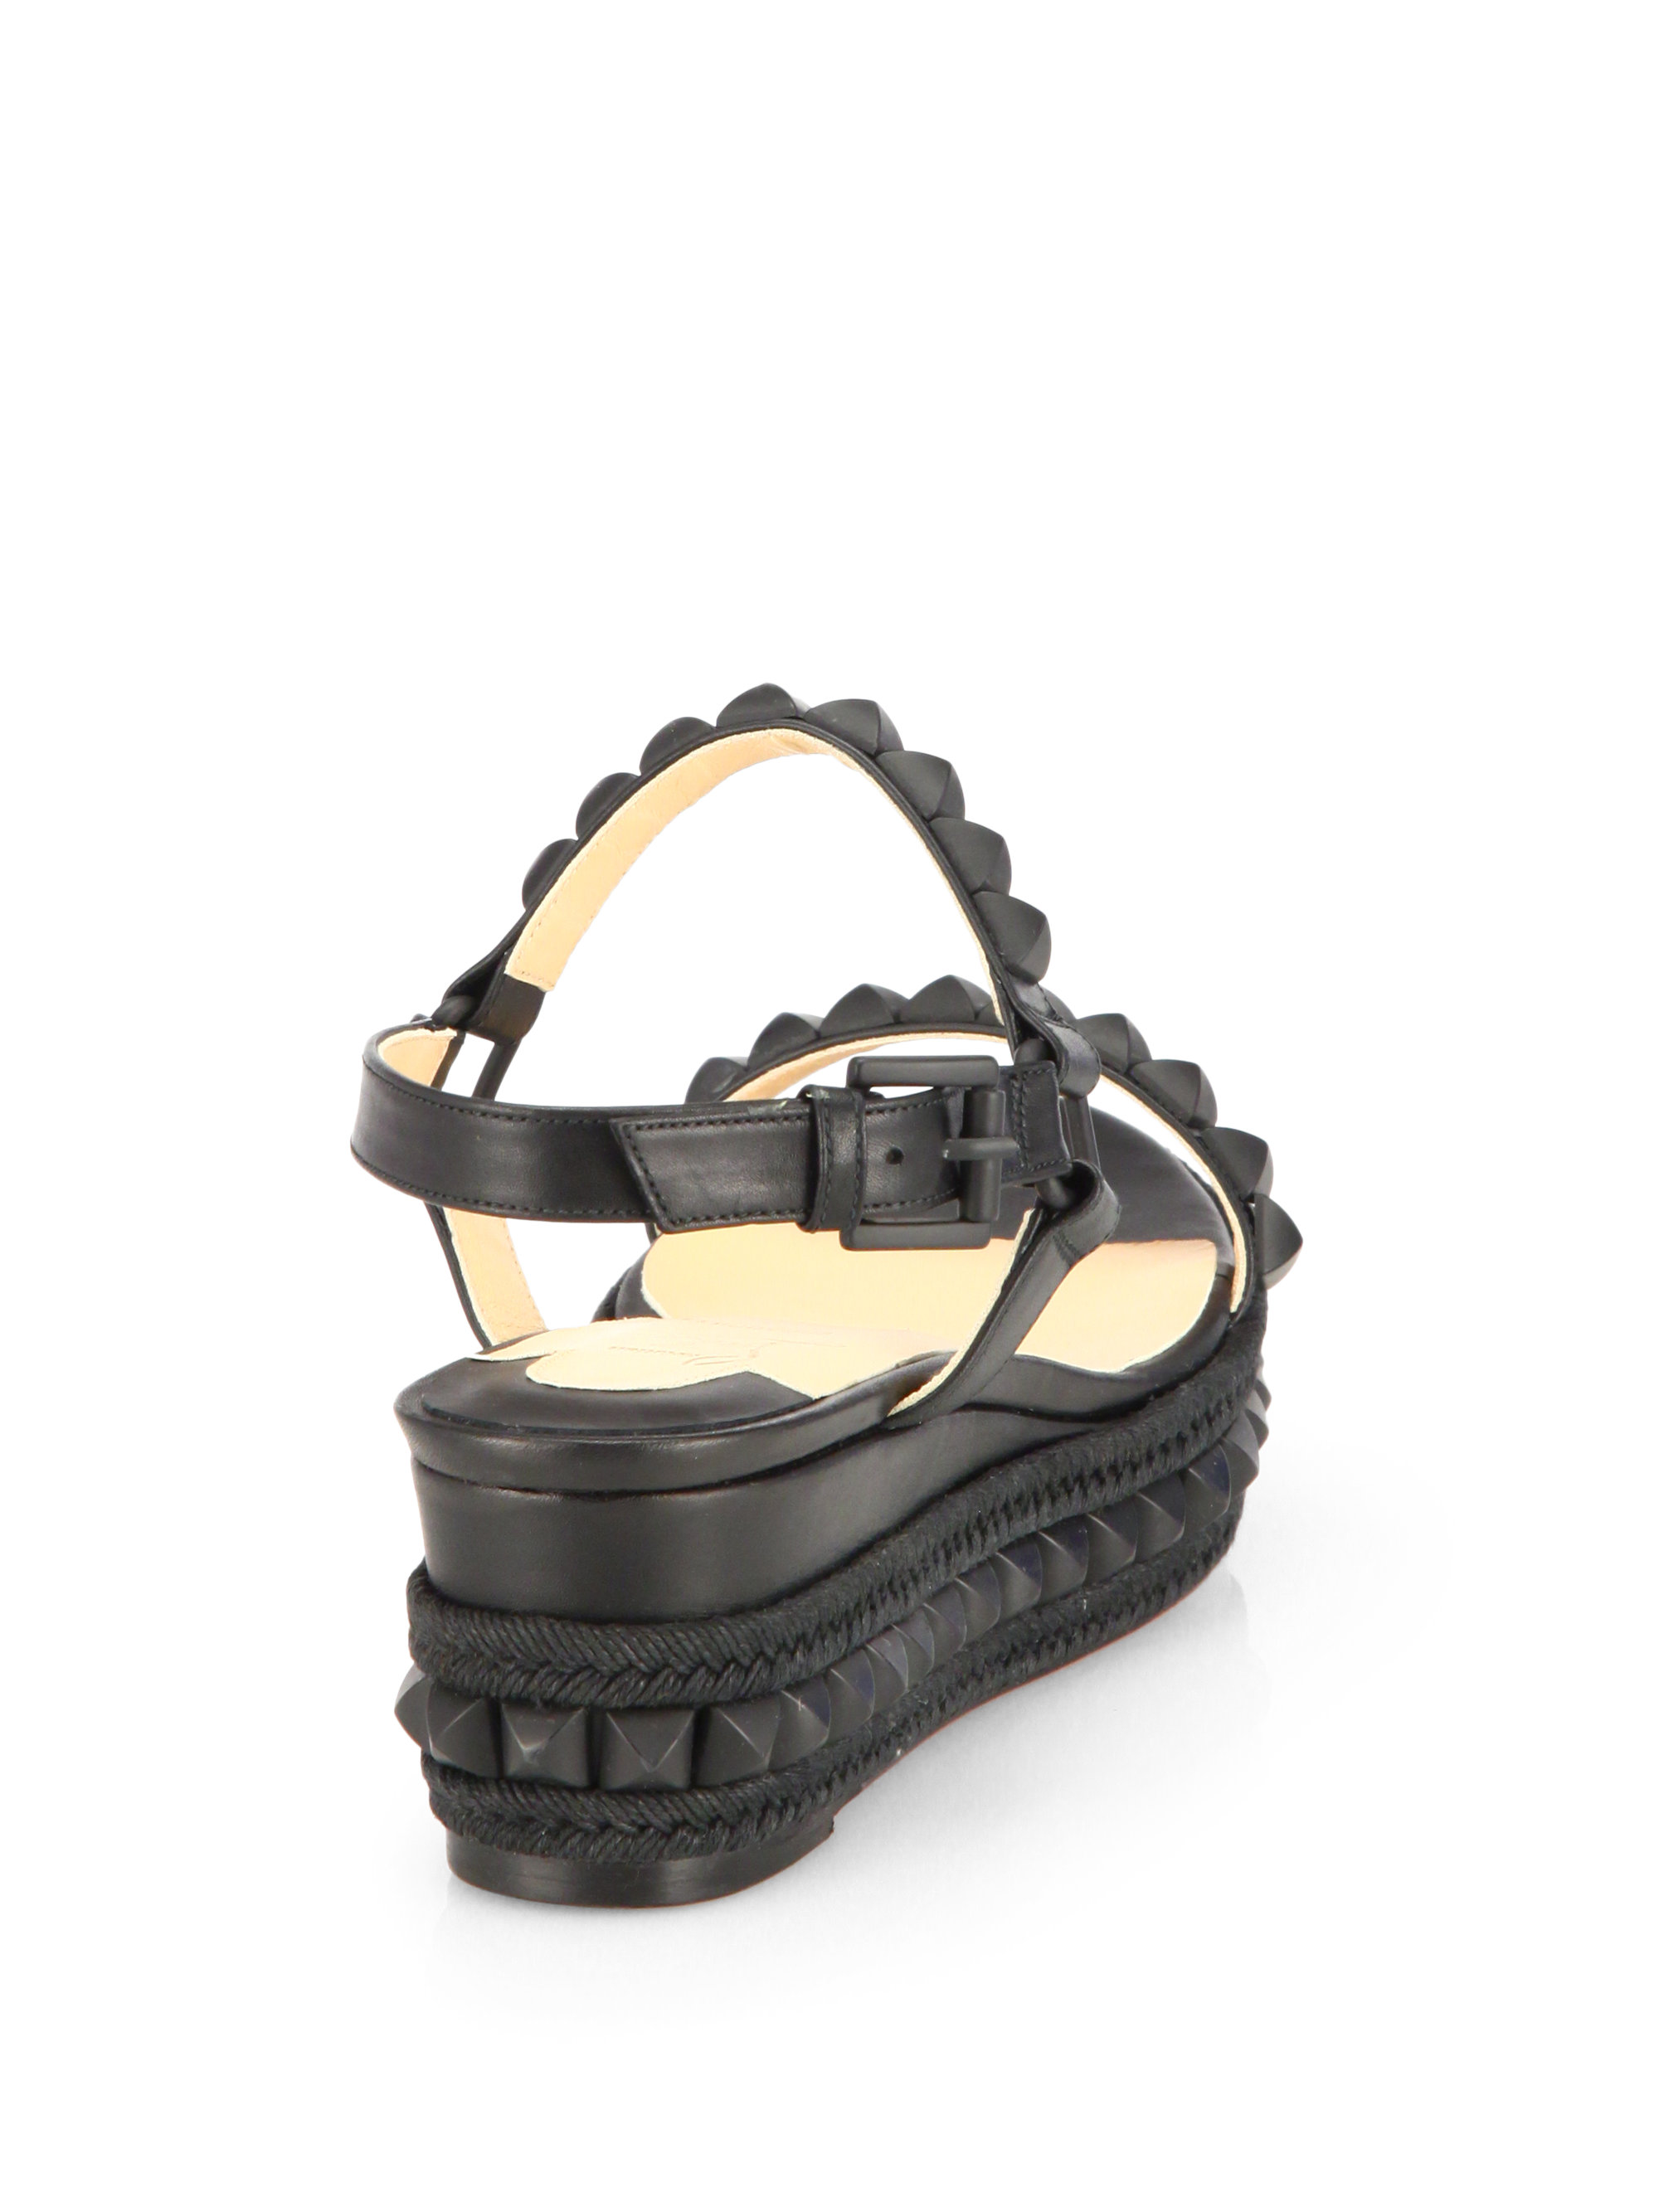 Christian Louboutin Cataclou Studded Wedge Sandals in Black - Lyst